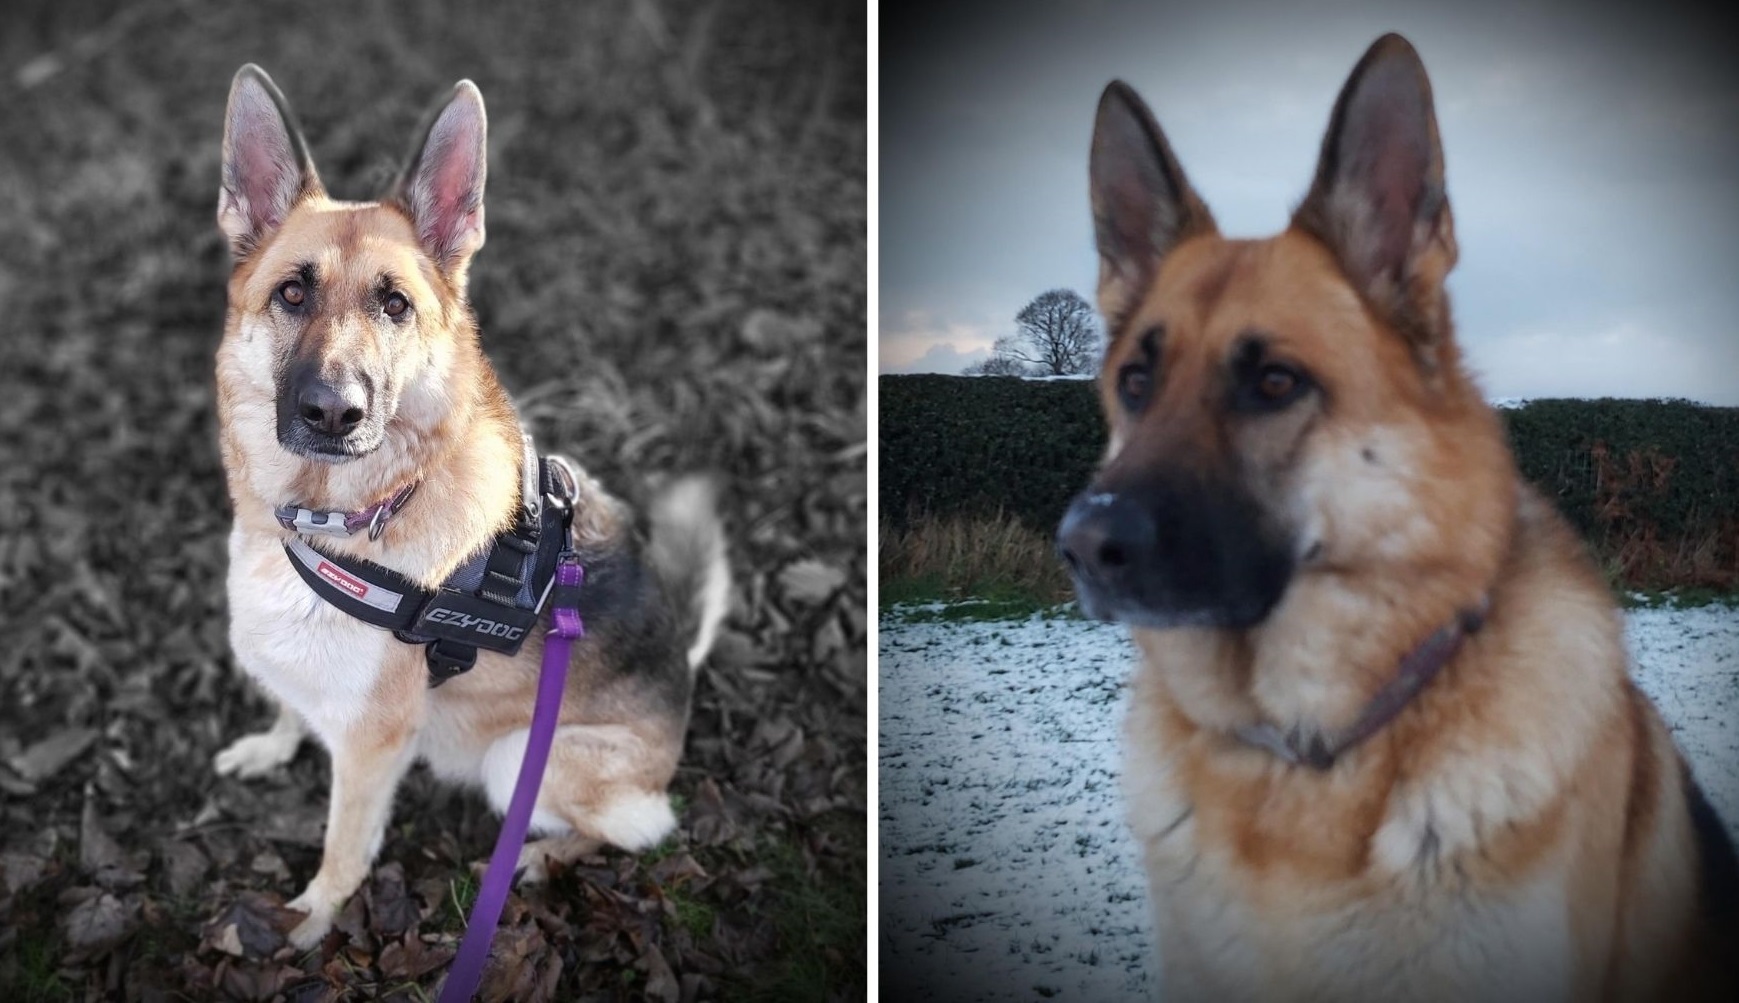 Linda Jones, from Mostyn, shared photos of her pet Elsie. She said: “Elsie is four-years-old and makes me laugh every day. She loves walks and likes to collect rocks and pebbles, in fact we have to bring home a souvenir rock from every walk or a maj